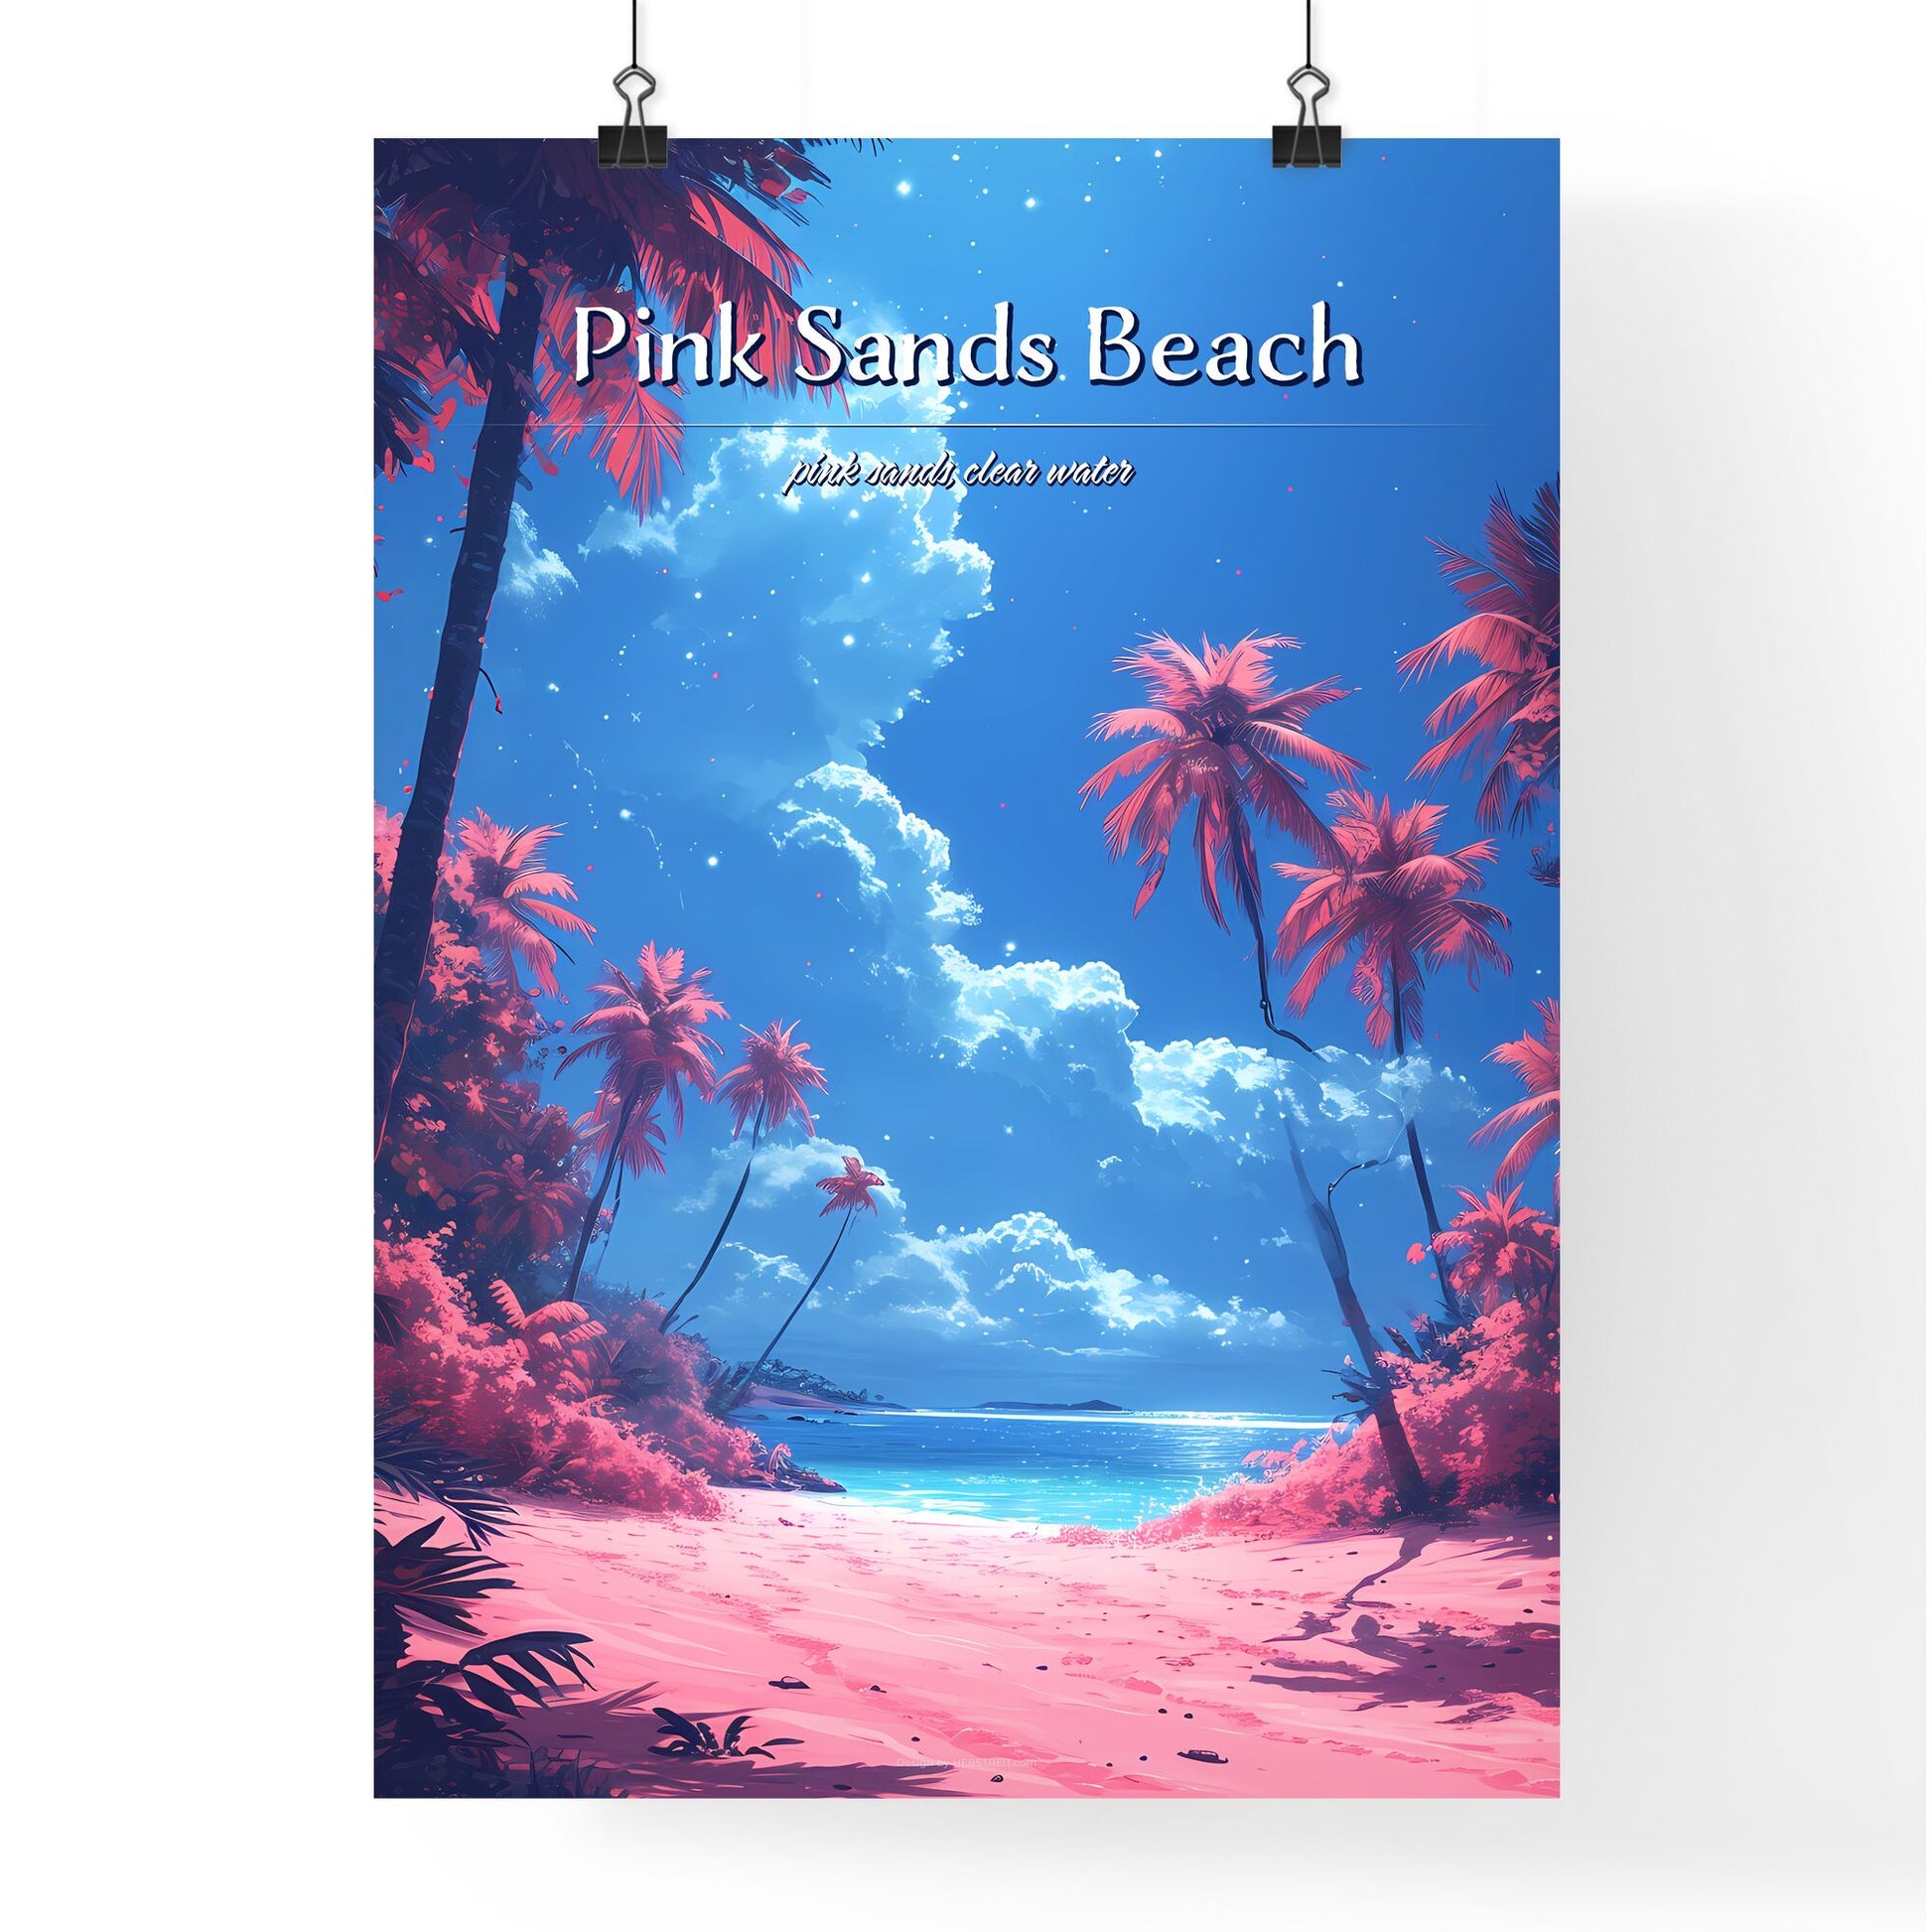 Pink Sands Beach - Art print of a beach with palm trees and a blue sky Default Title